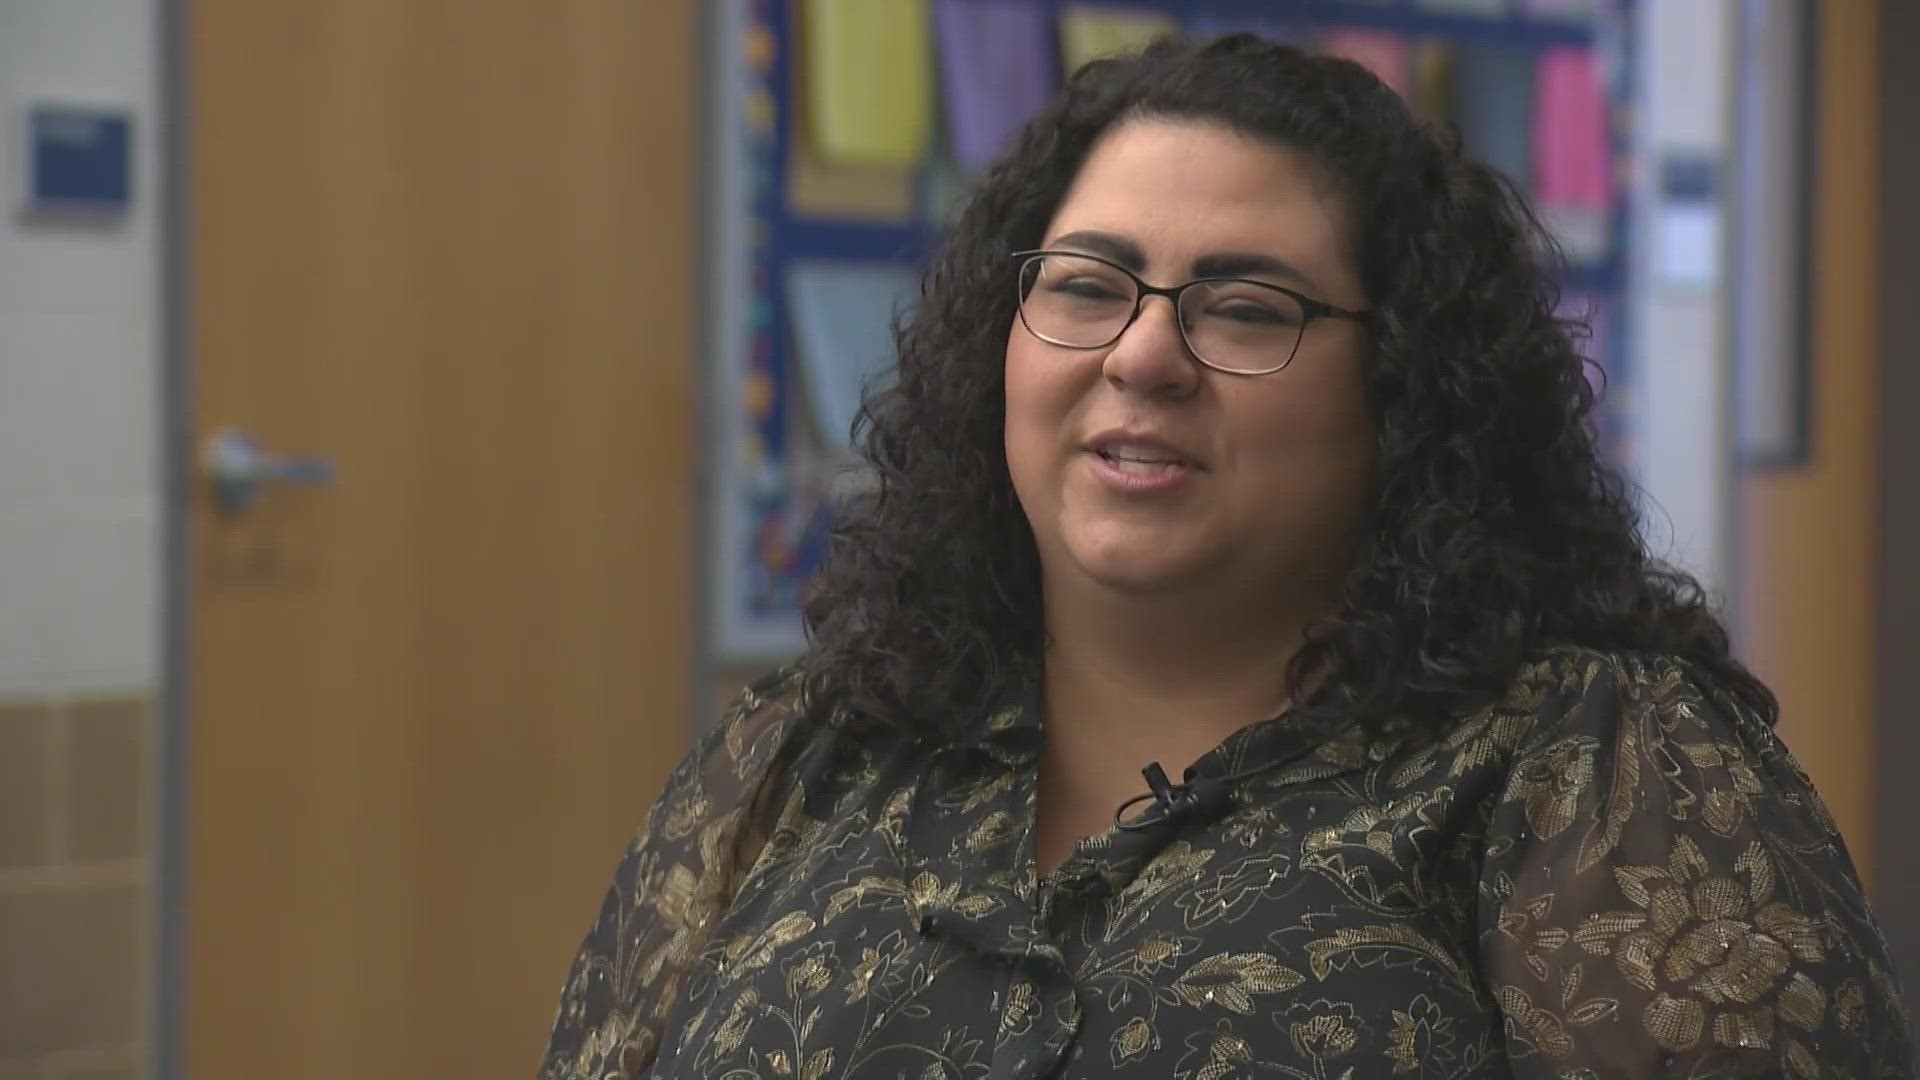 This 3rd grade math teacher's commitment to her students has been unwavering, despite life’s challenges.